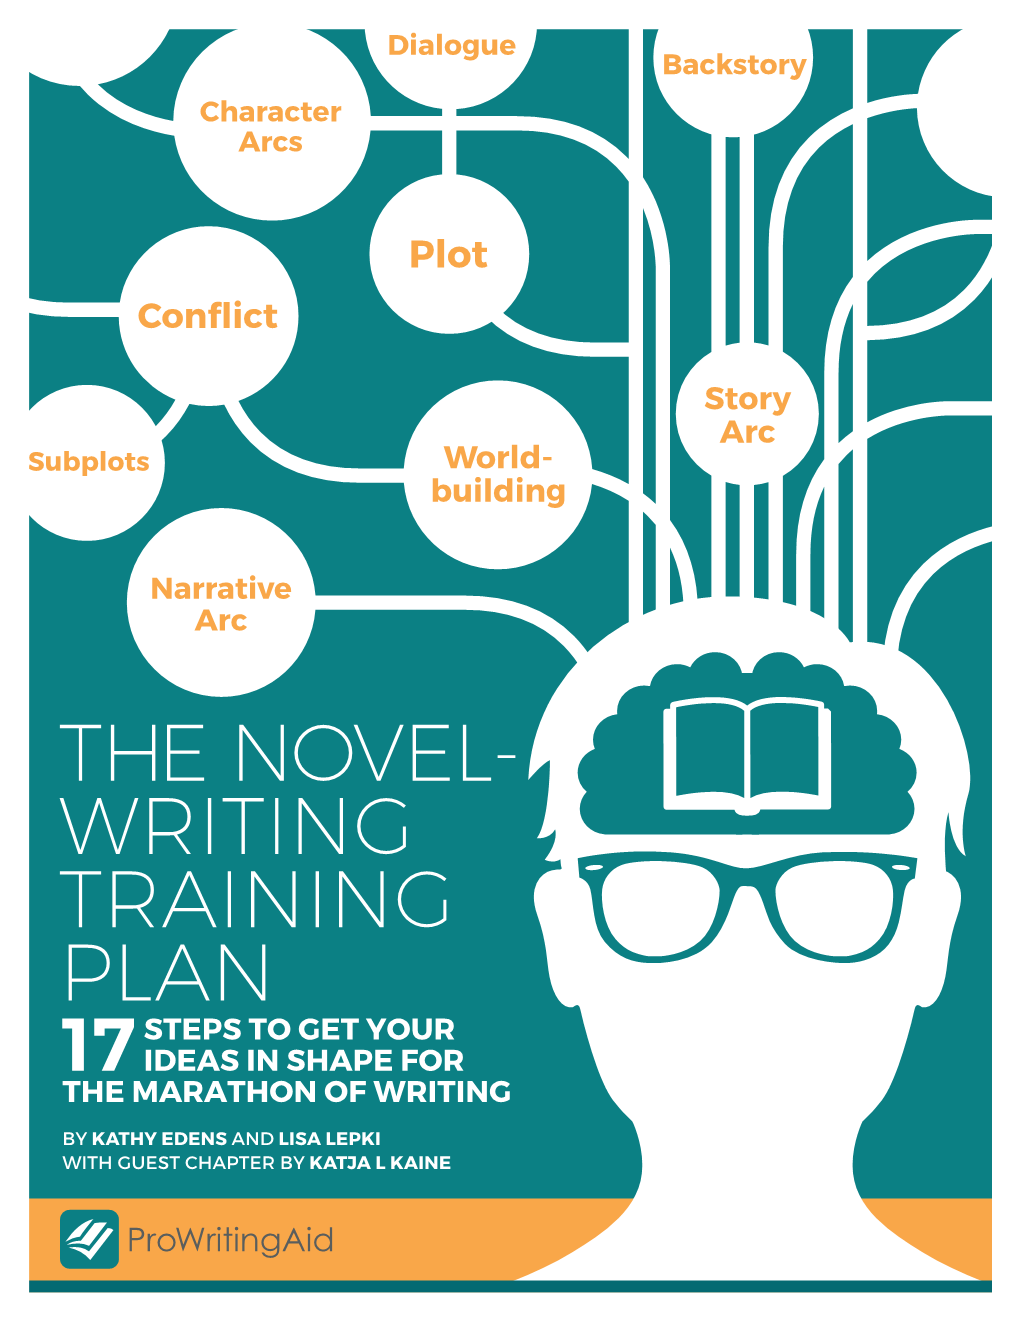 The Novel- Writing Training Plan Steps to Get Your 17 Ideas in Shape for the Marathon of Writing